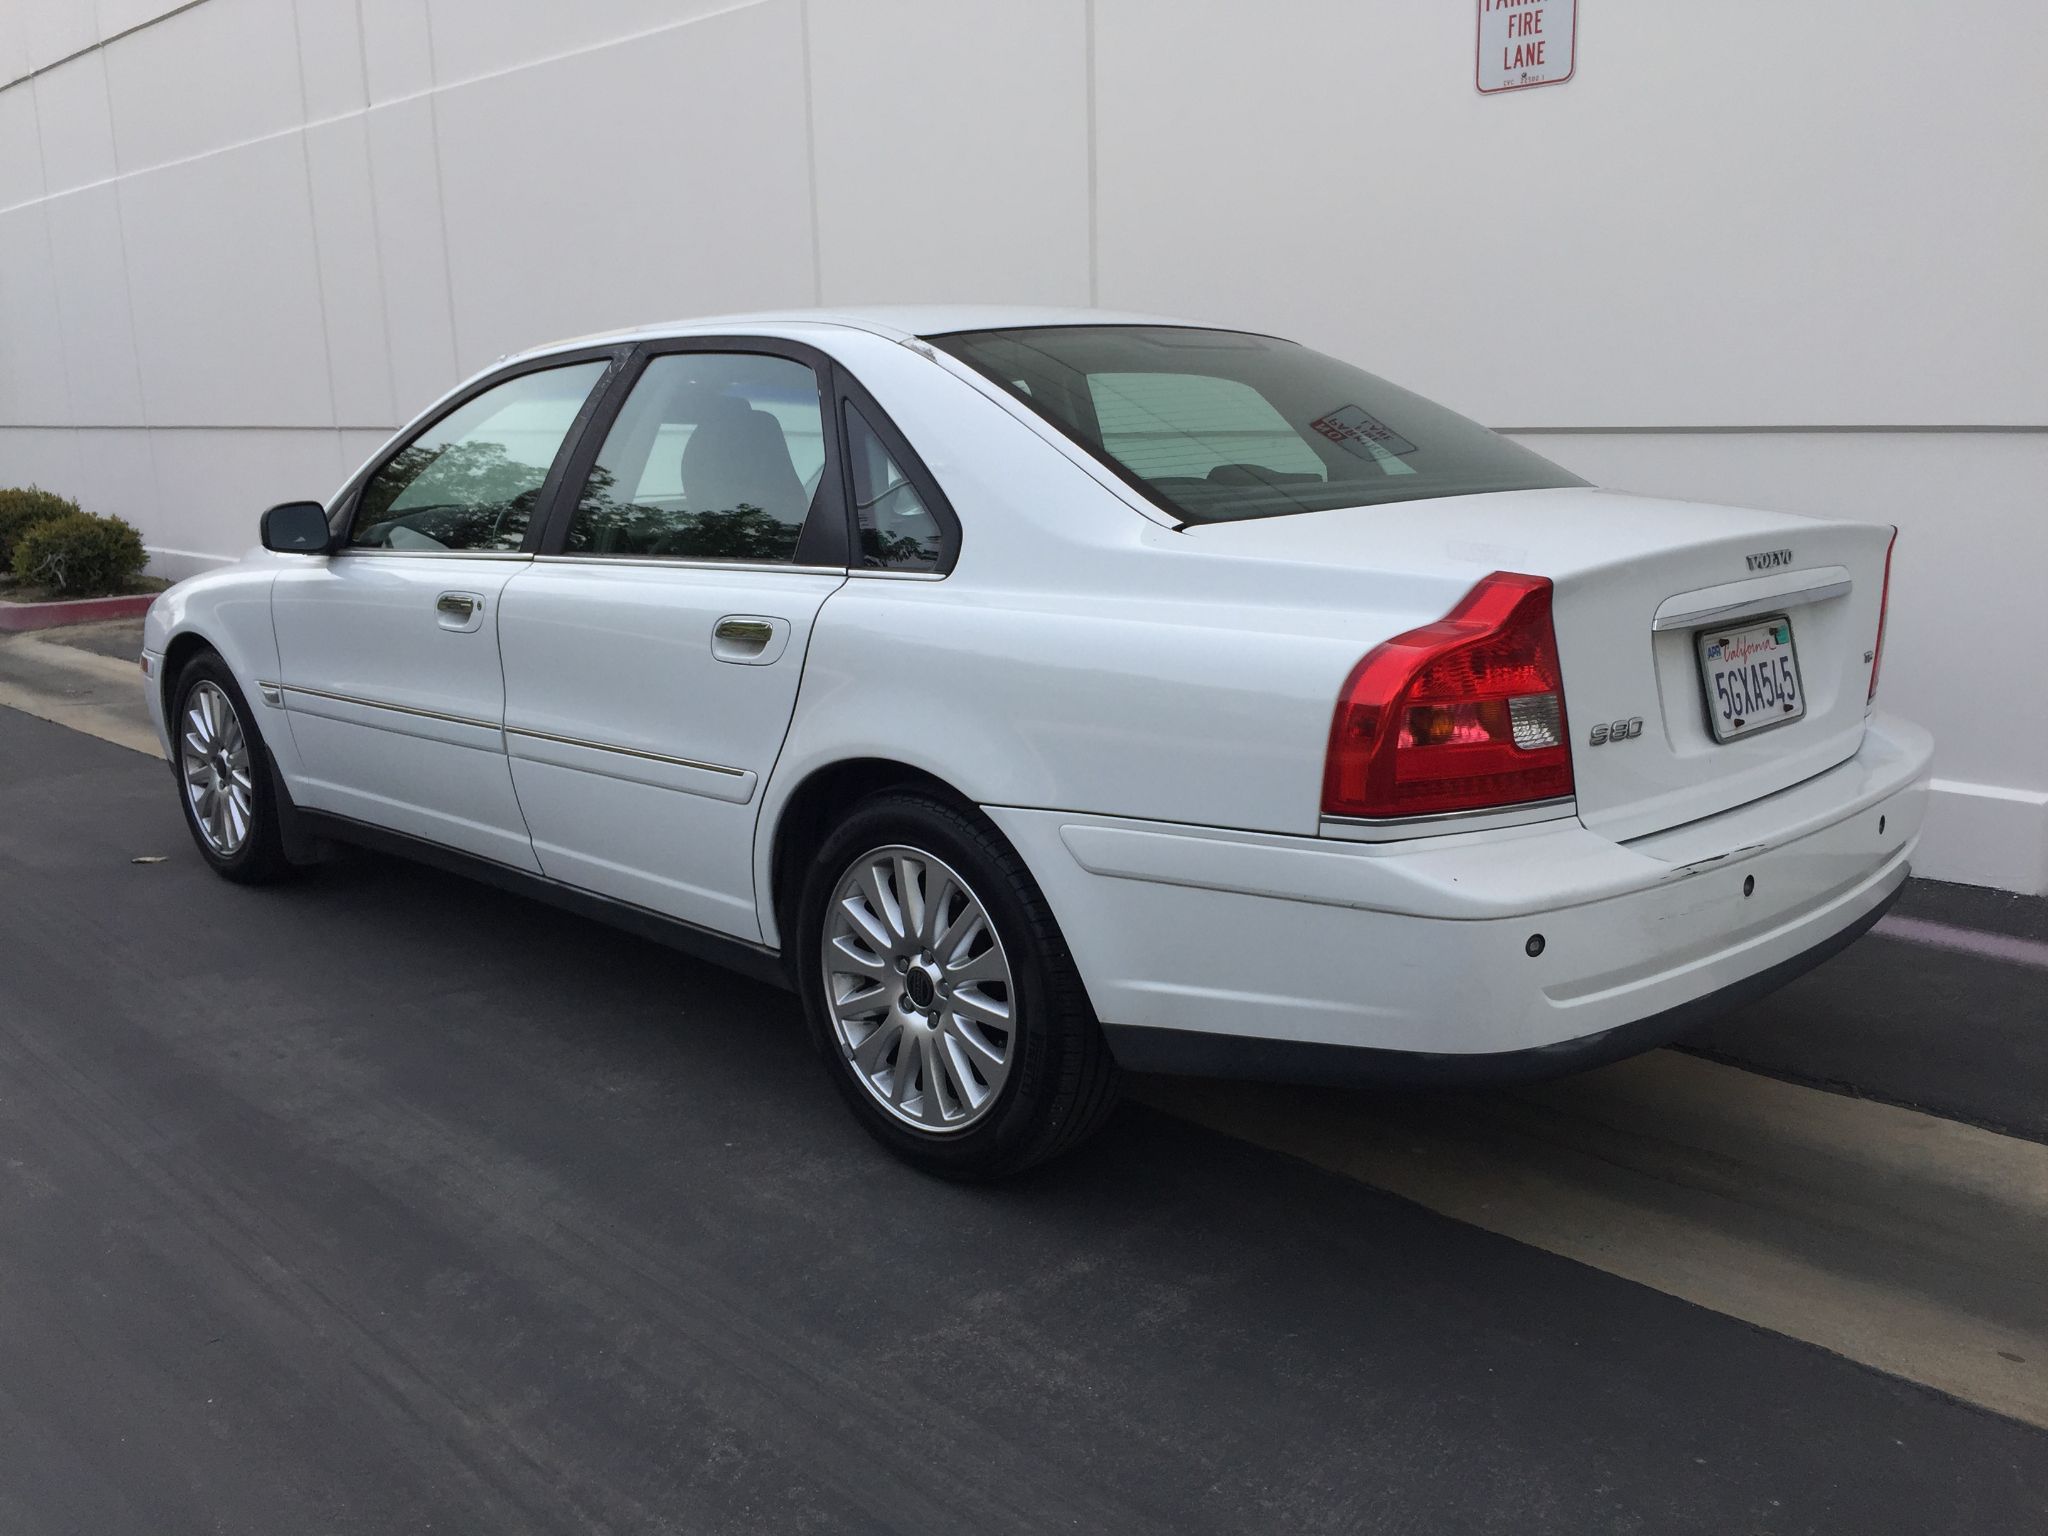 Used 2004 Volvo S80 Premier at City Cars Warehouse INC